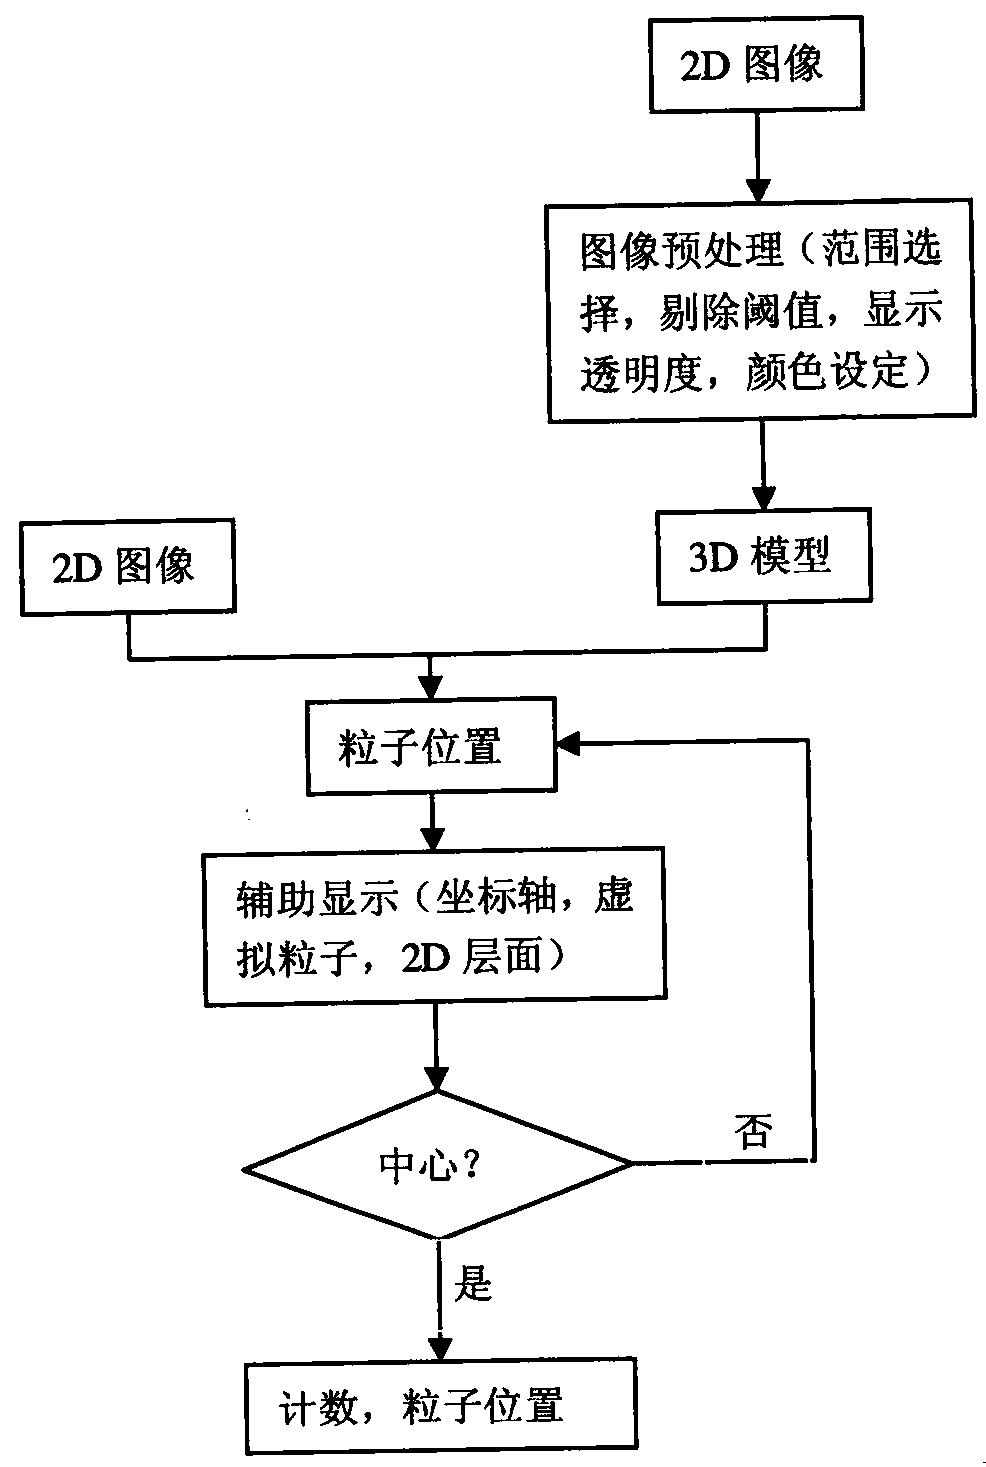 Seed counting method of interaction of 2D image and 3D image